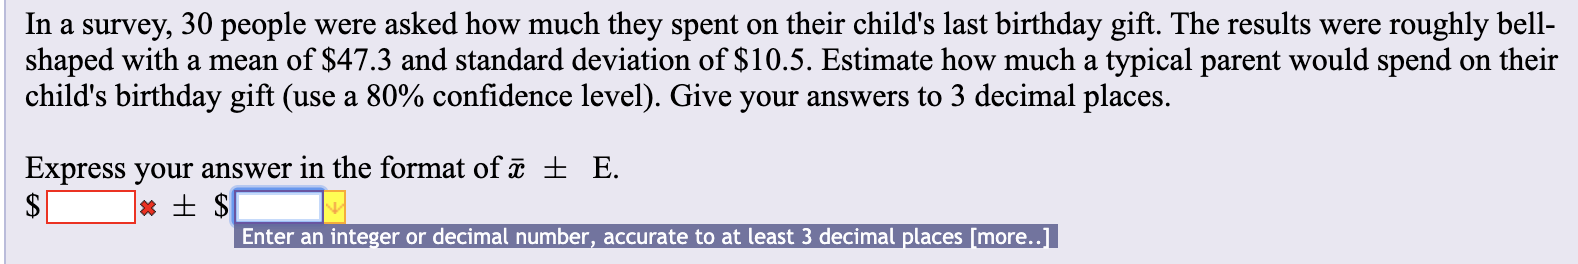 roughly bell
on their
were asked how much they spent on their child's last birthday gift. The results were
shaped with a mean of $47.3 and standard deviation of $10.5. Estimate how much a typical parent would spend
In a survey, 30 people
child's birthday gift (use a 80% confidence level). Give your answers to 3 decimal places.
E
Express your answer in the format of a ±
Enter an integer or decimal number, accurate to at least 3 decimal places [more.]
